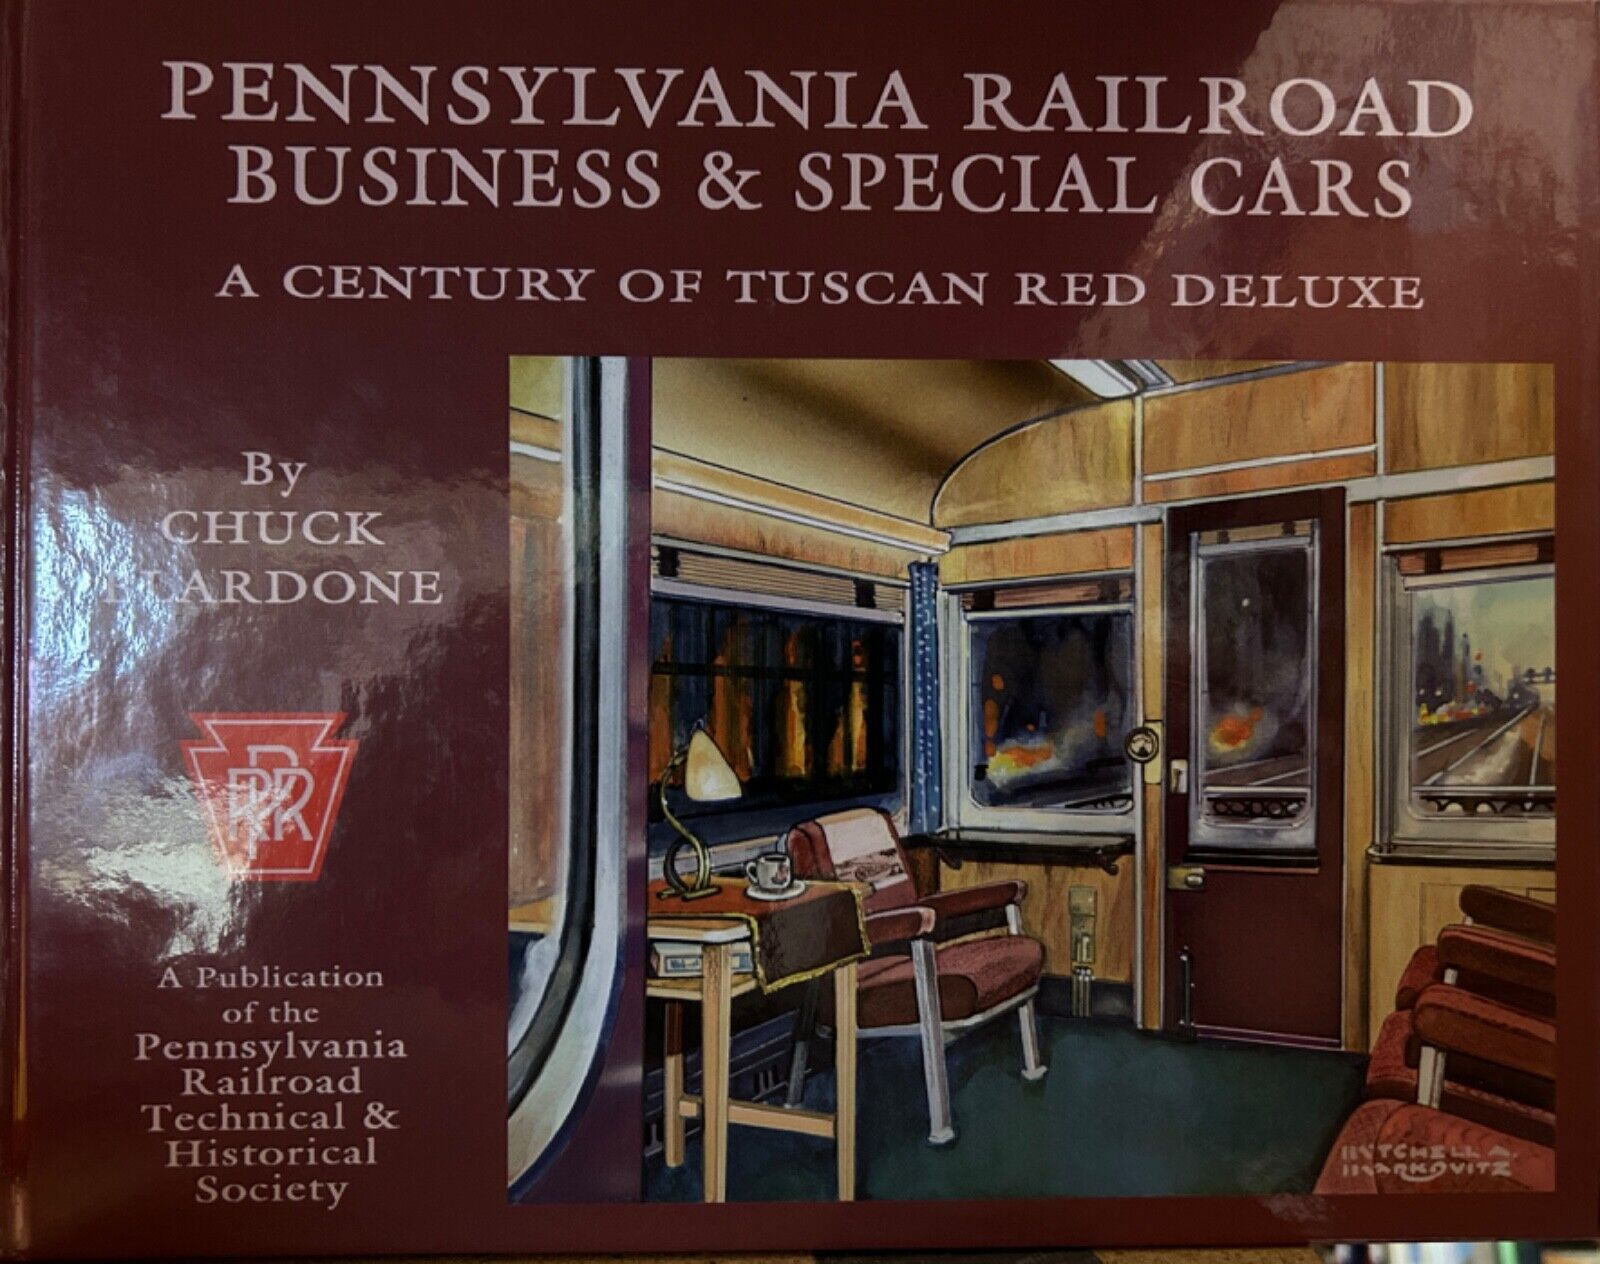 Pennsylvania Railroad Business & Special Cars Century of Tuscan Red Deluxe